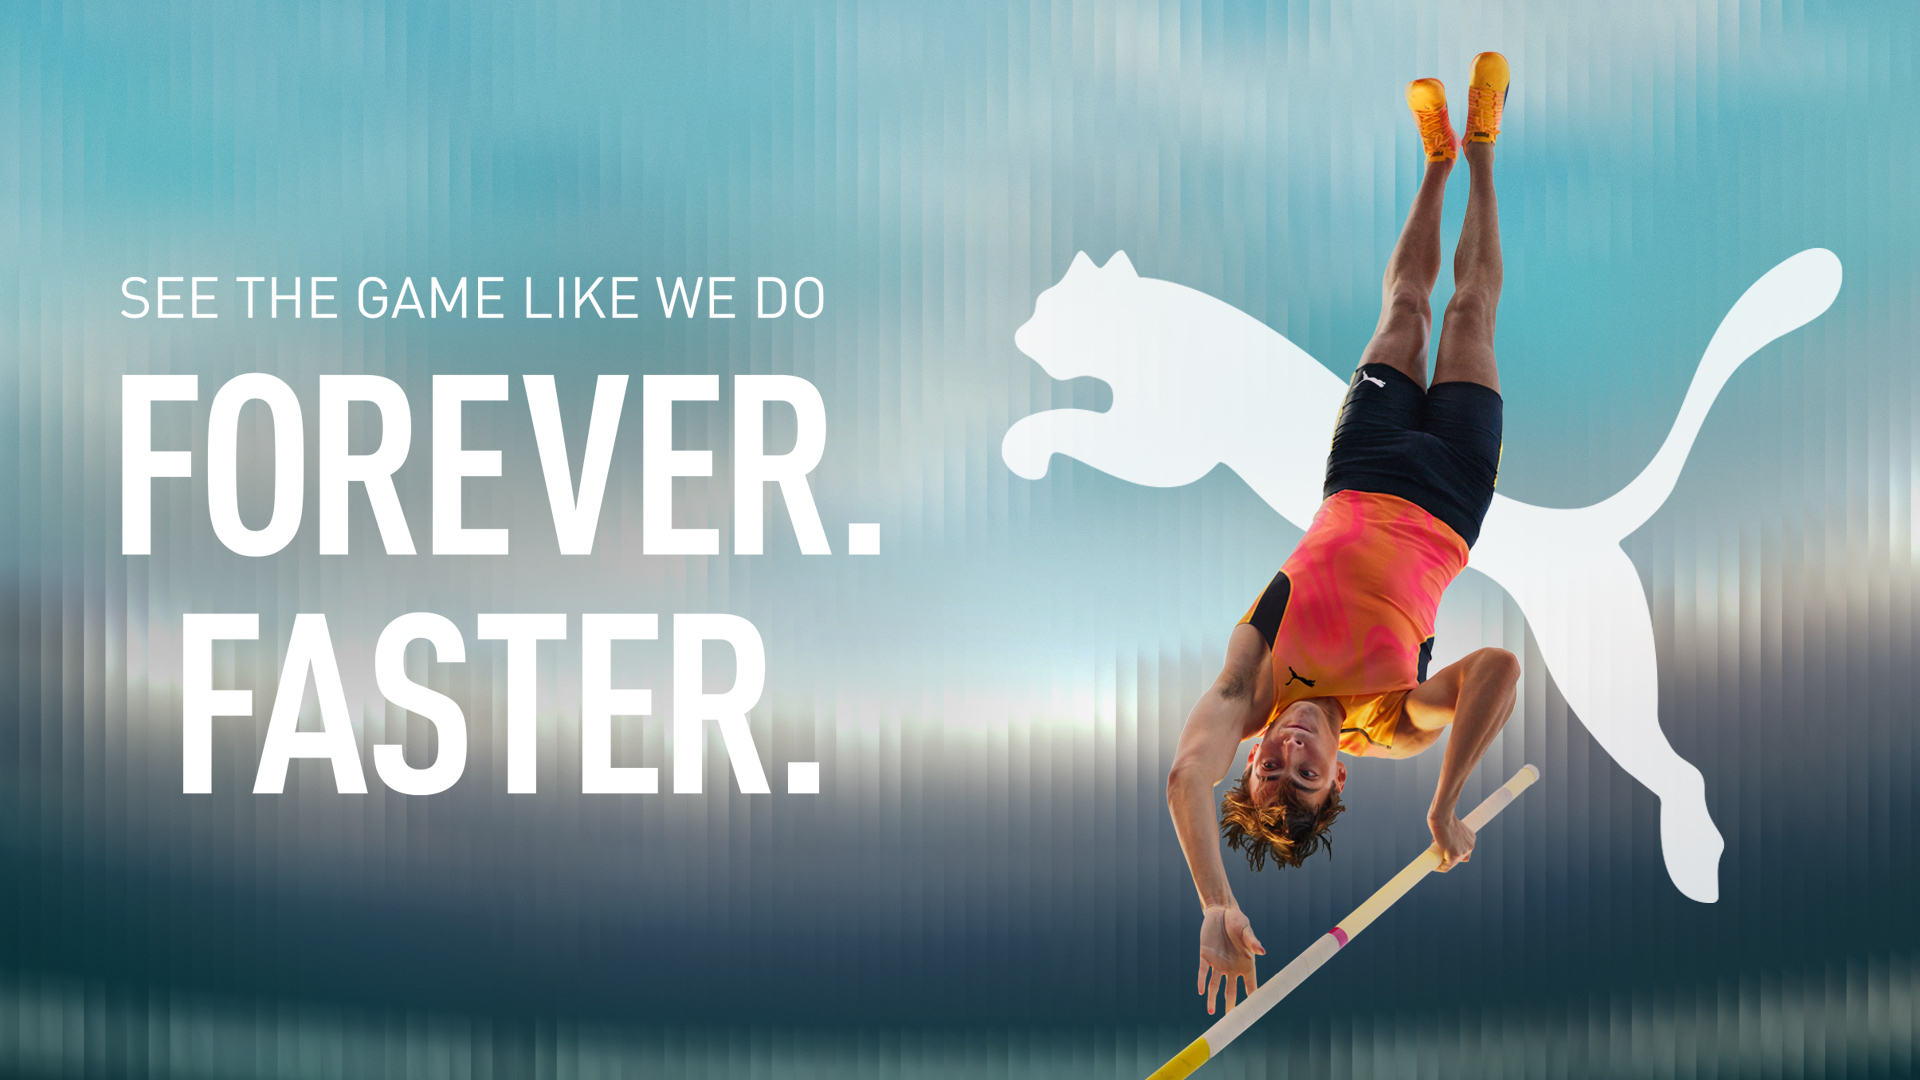 PUMA LAUNCHES MAJOR BRAND CAMPAIGN TO STRENGTHEN SPORTS PERFORMANCE POSITIONING | PUMA®